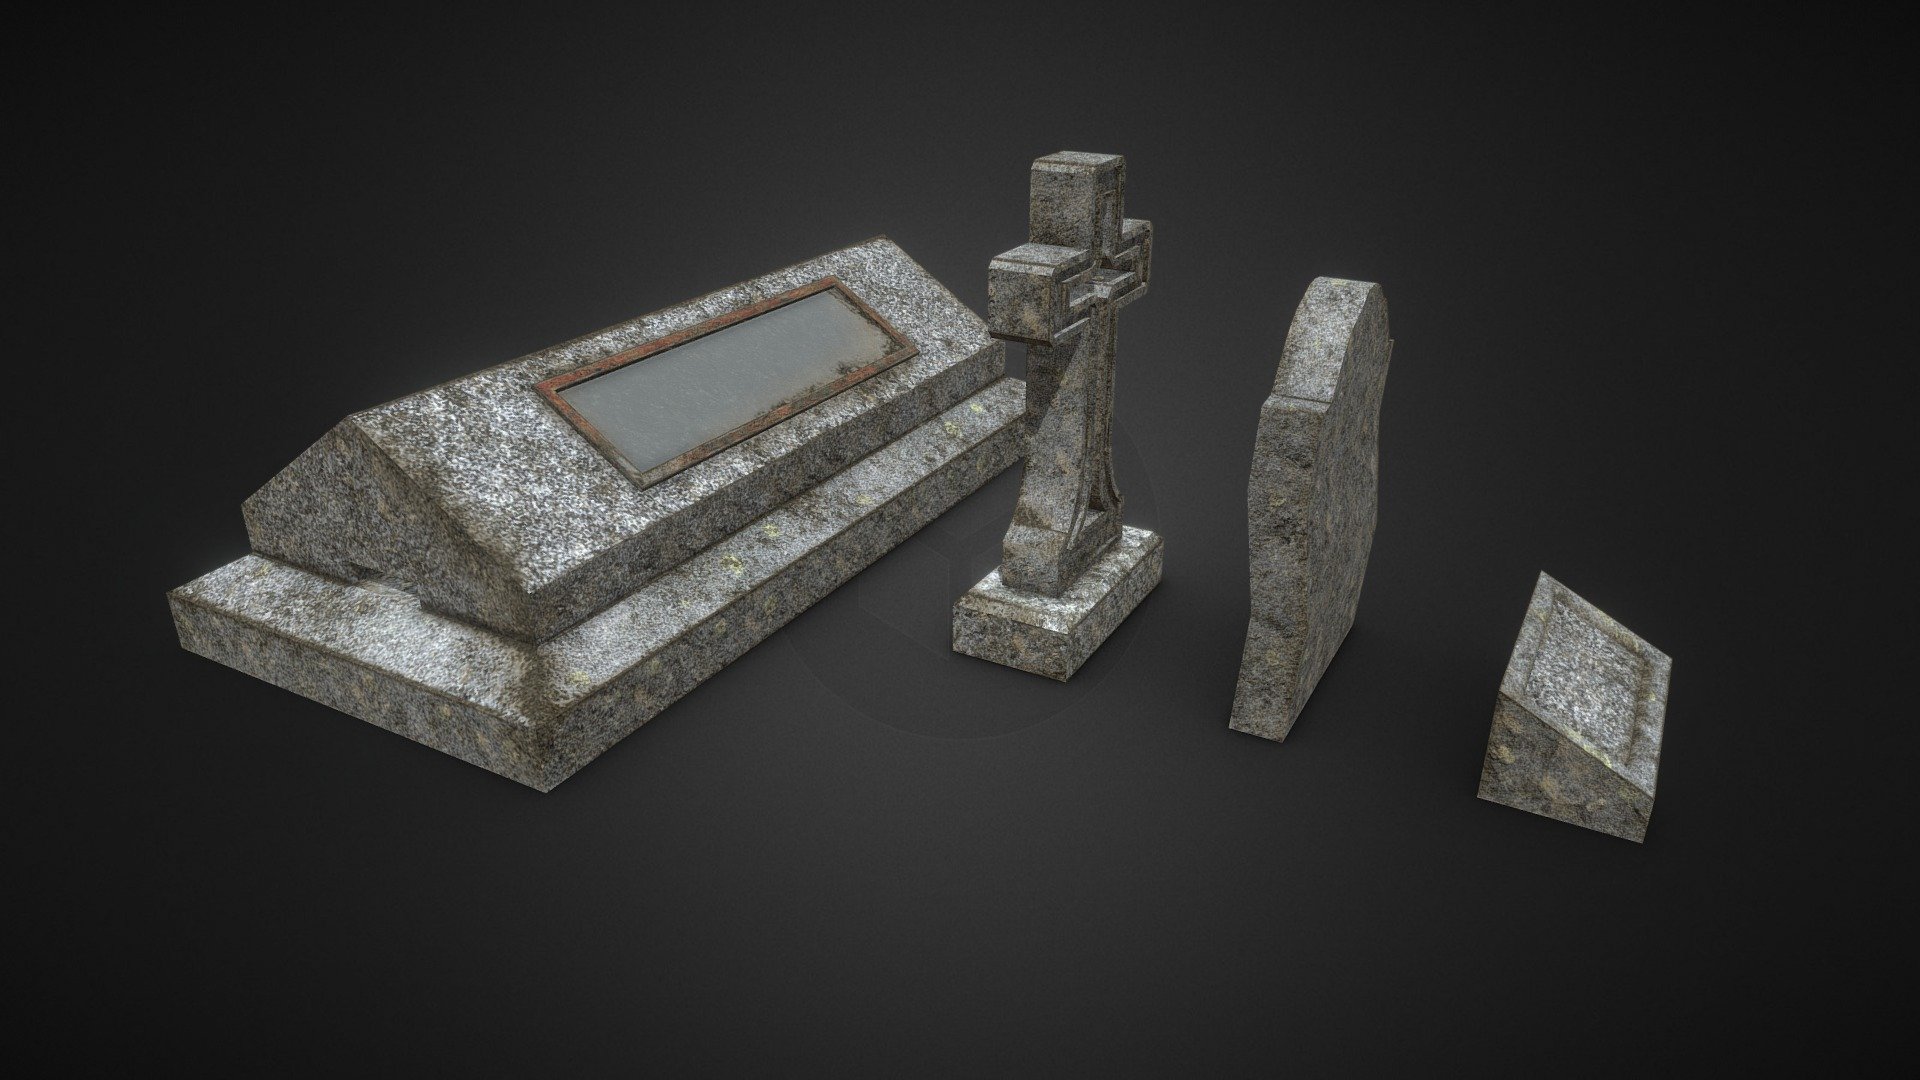 This is a model of a set of gravestones. Very low poly, entire scene is barely over 1k tri's.
This is ready for UE4, Unity, Godot, etc.

I also do requests, so if you want anything specific made for your scene or game, let me know 3d model